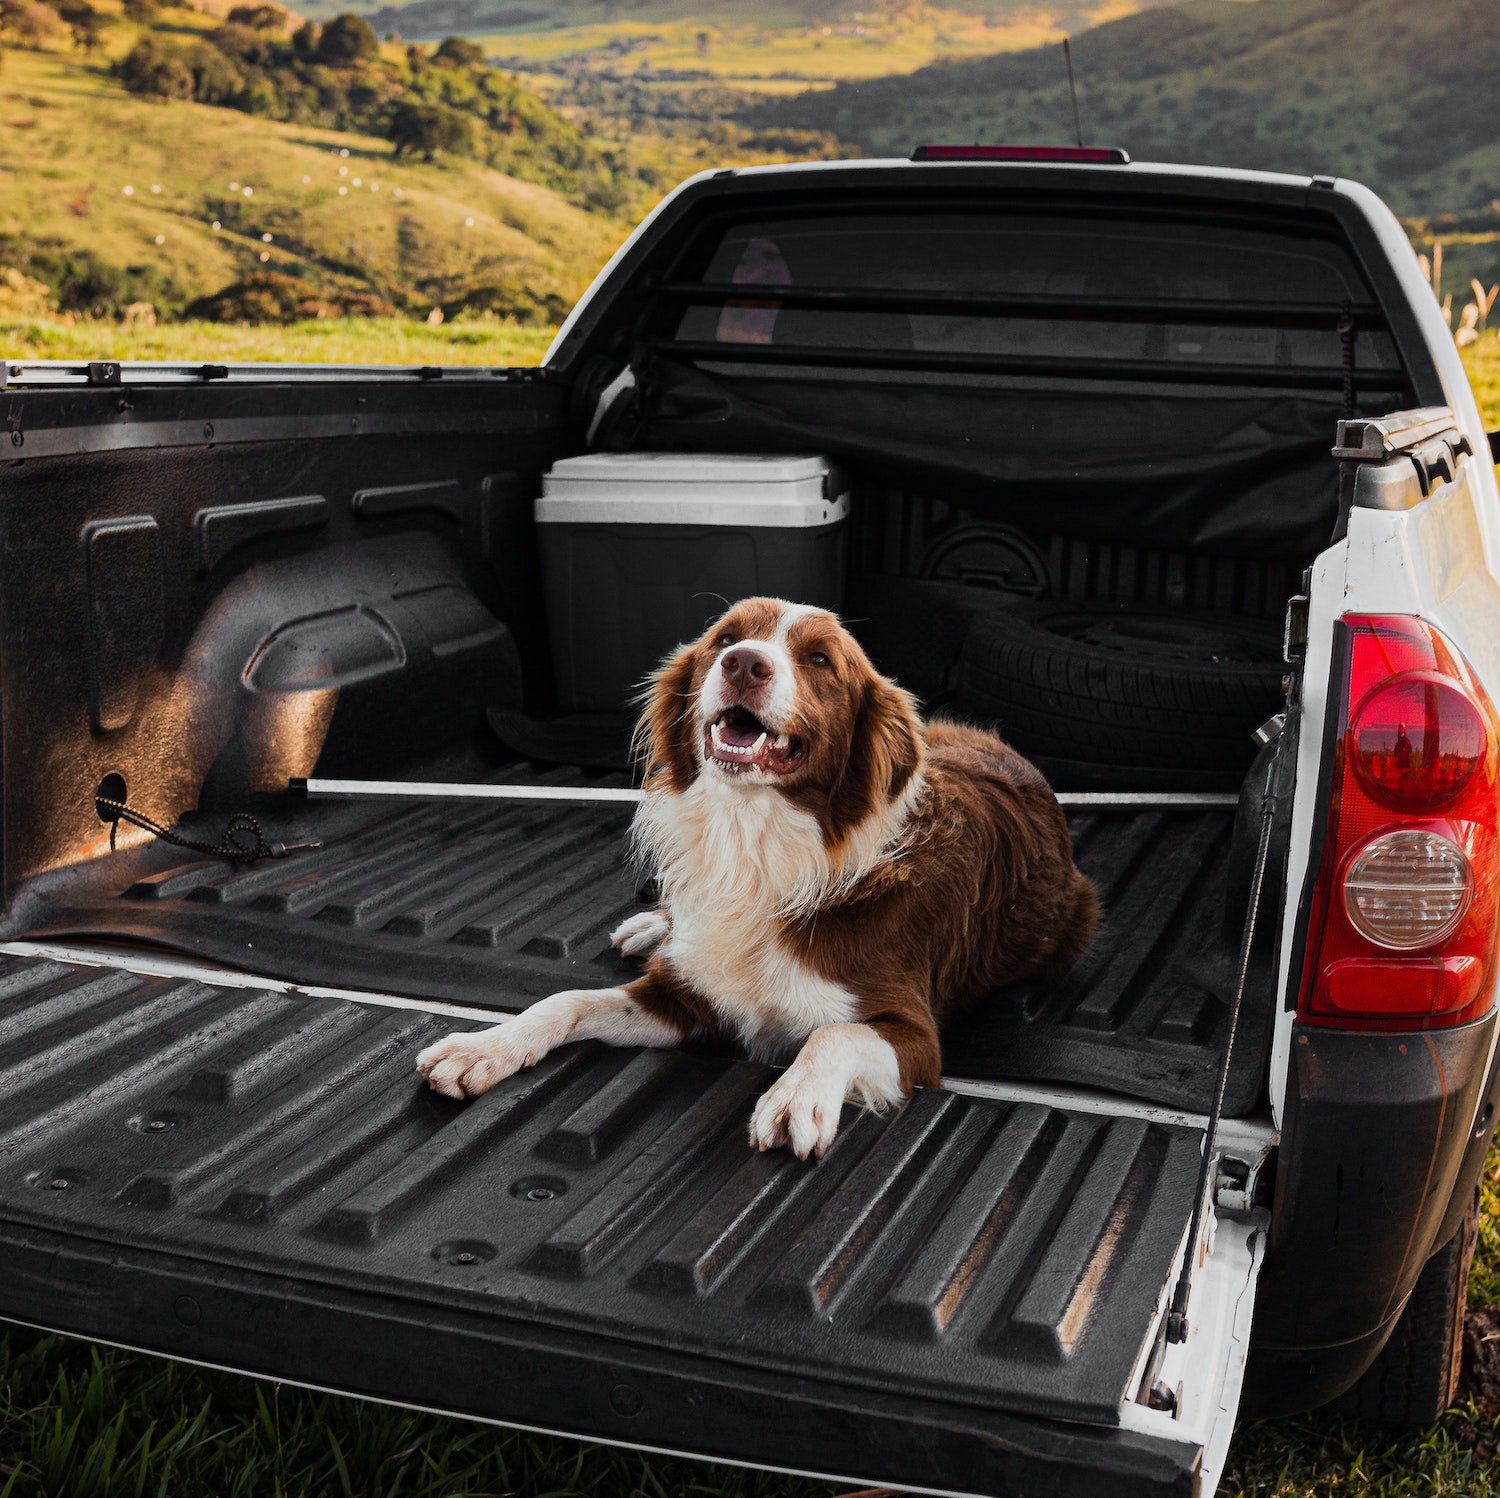 A dog in the bed of a compact pickup truck, parked with mountains in the background.